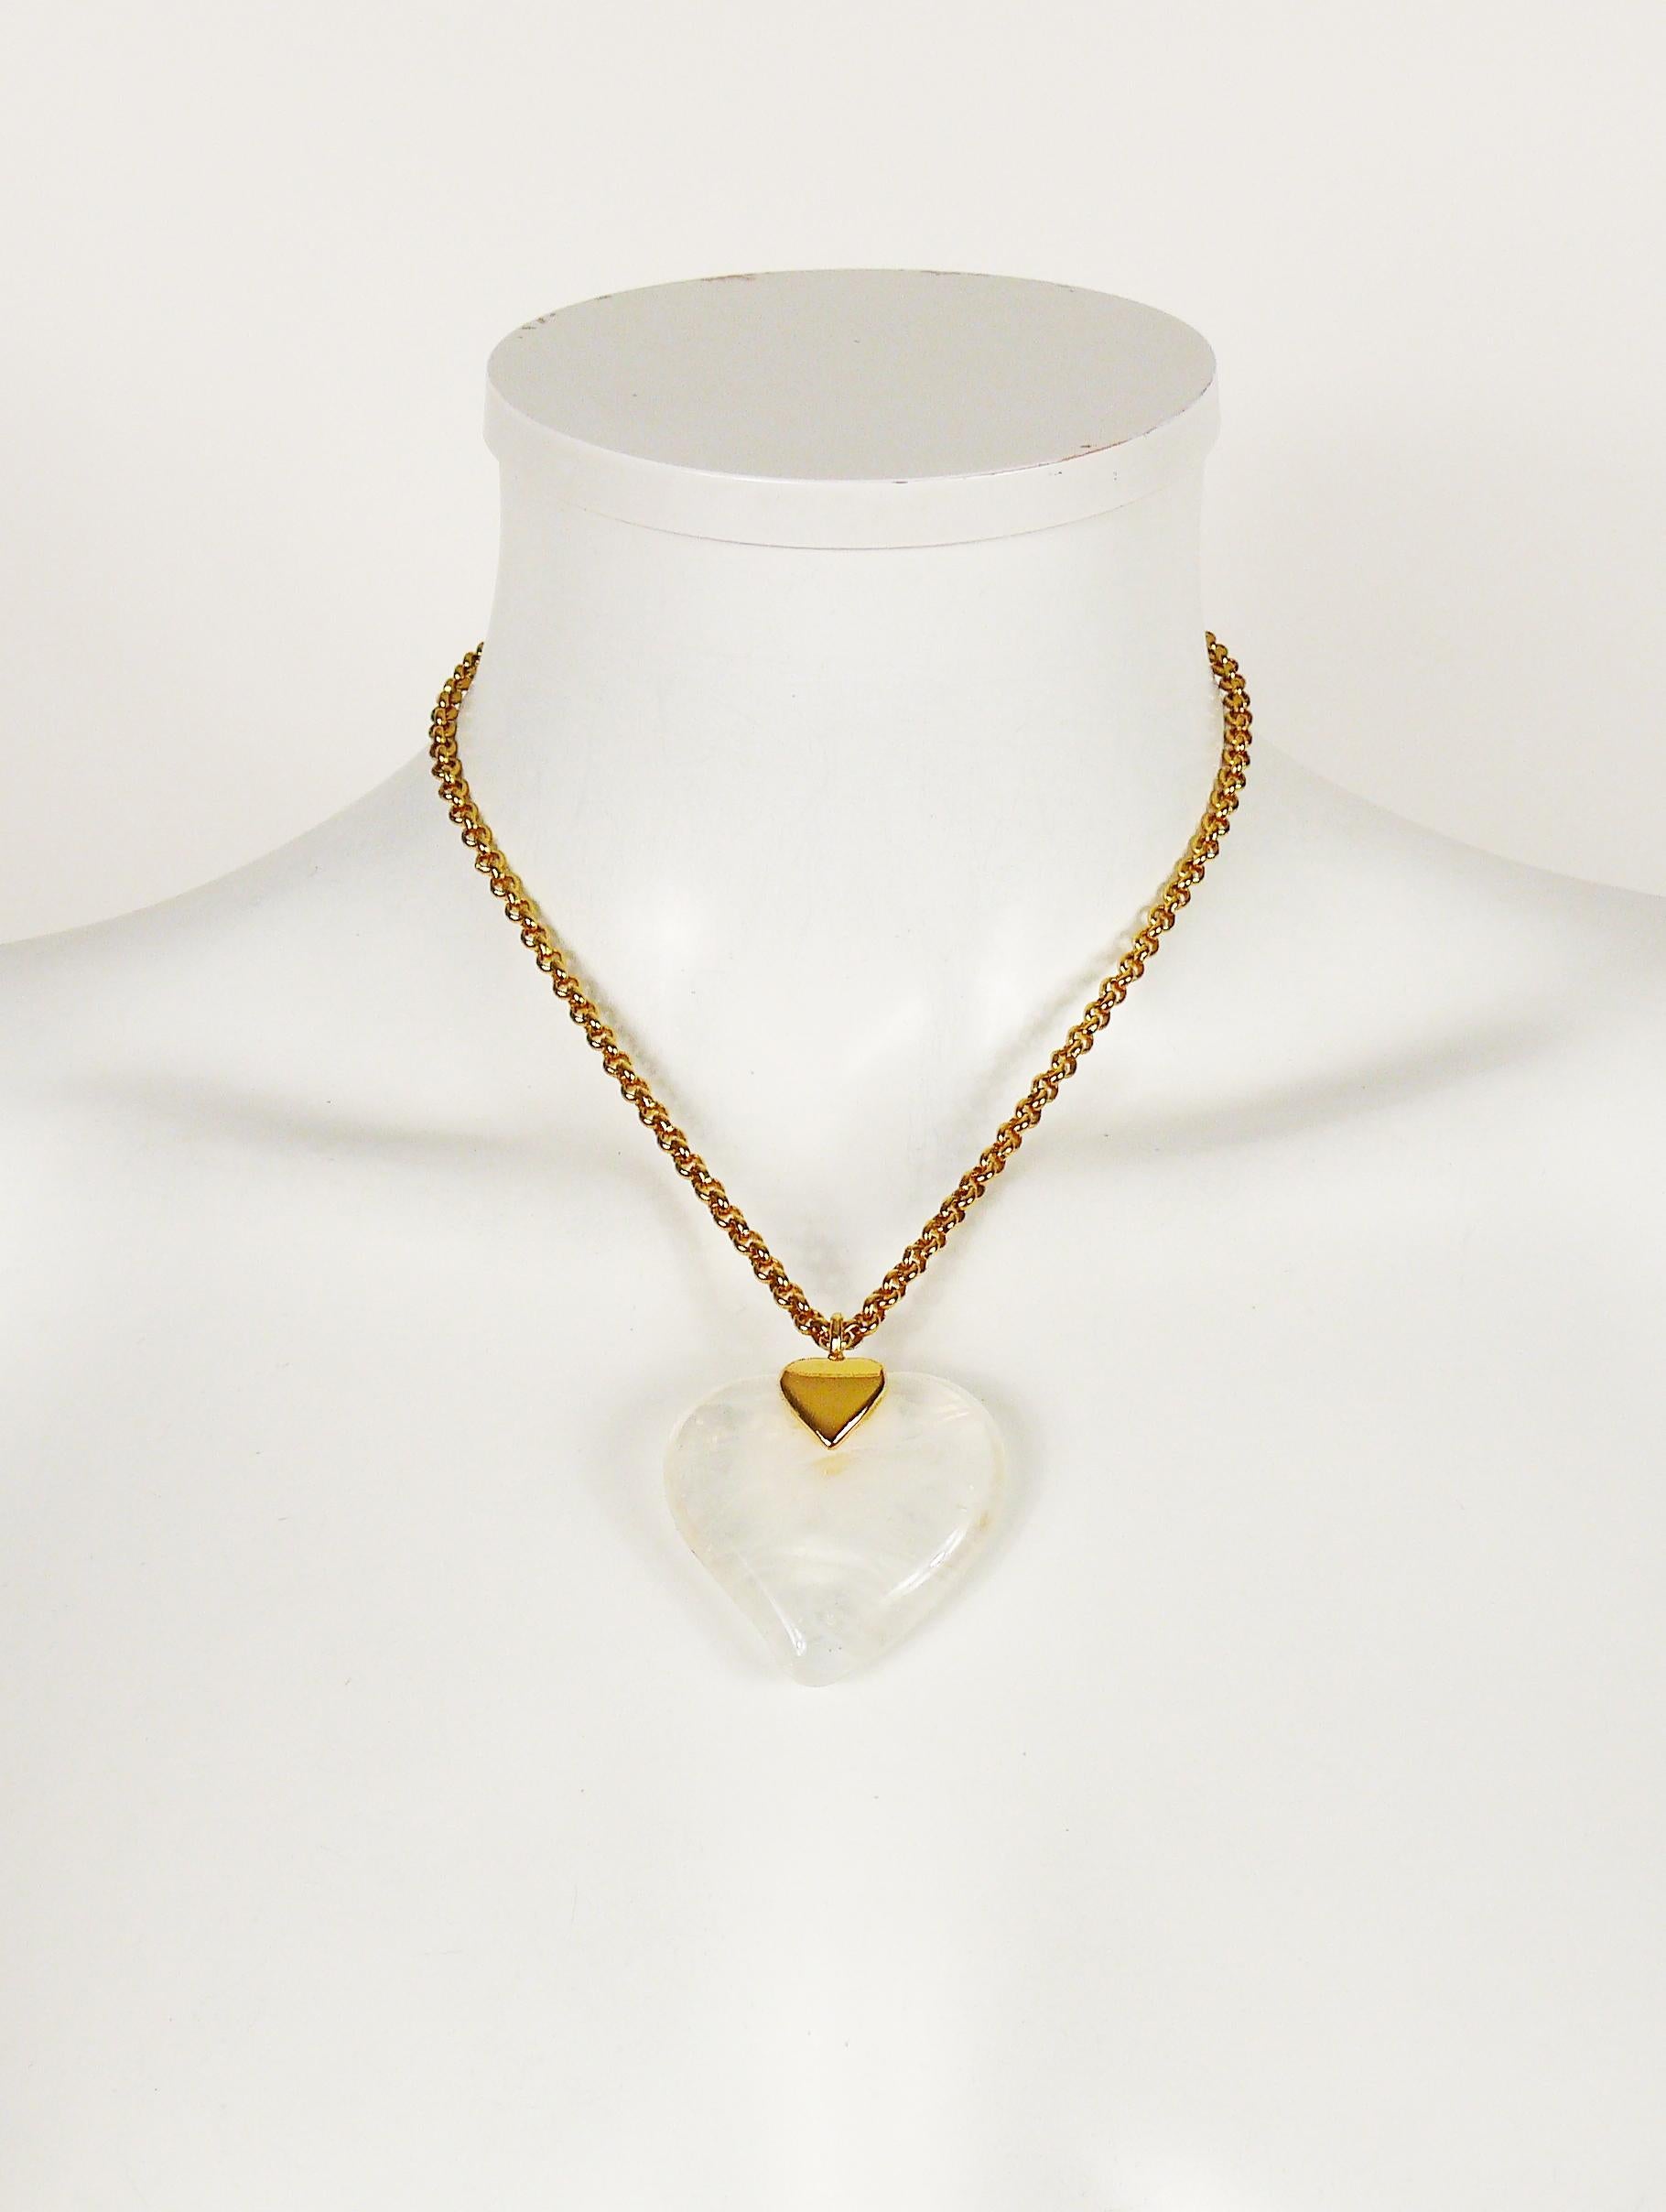 Yves Saint Laurent vintage gold toned chain necklace featuring a glass heart pendant with white marbled inclusions and bubbles.

Lobster clasp closure.

Embossed YLS Made in France.

Indicative measurements : chain total length approx. 42 cm (16.54